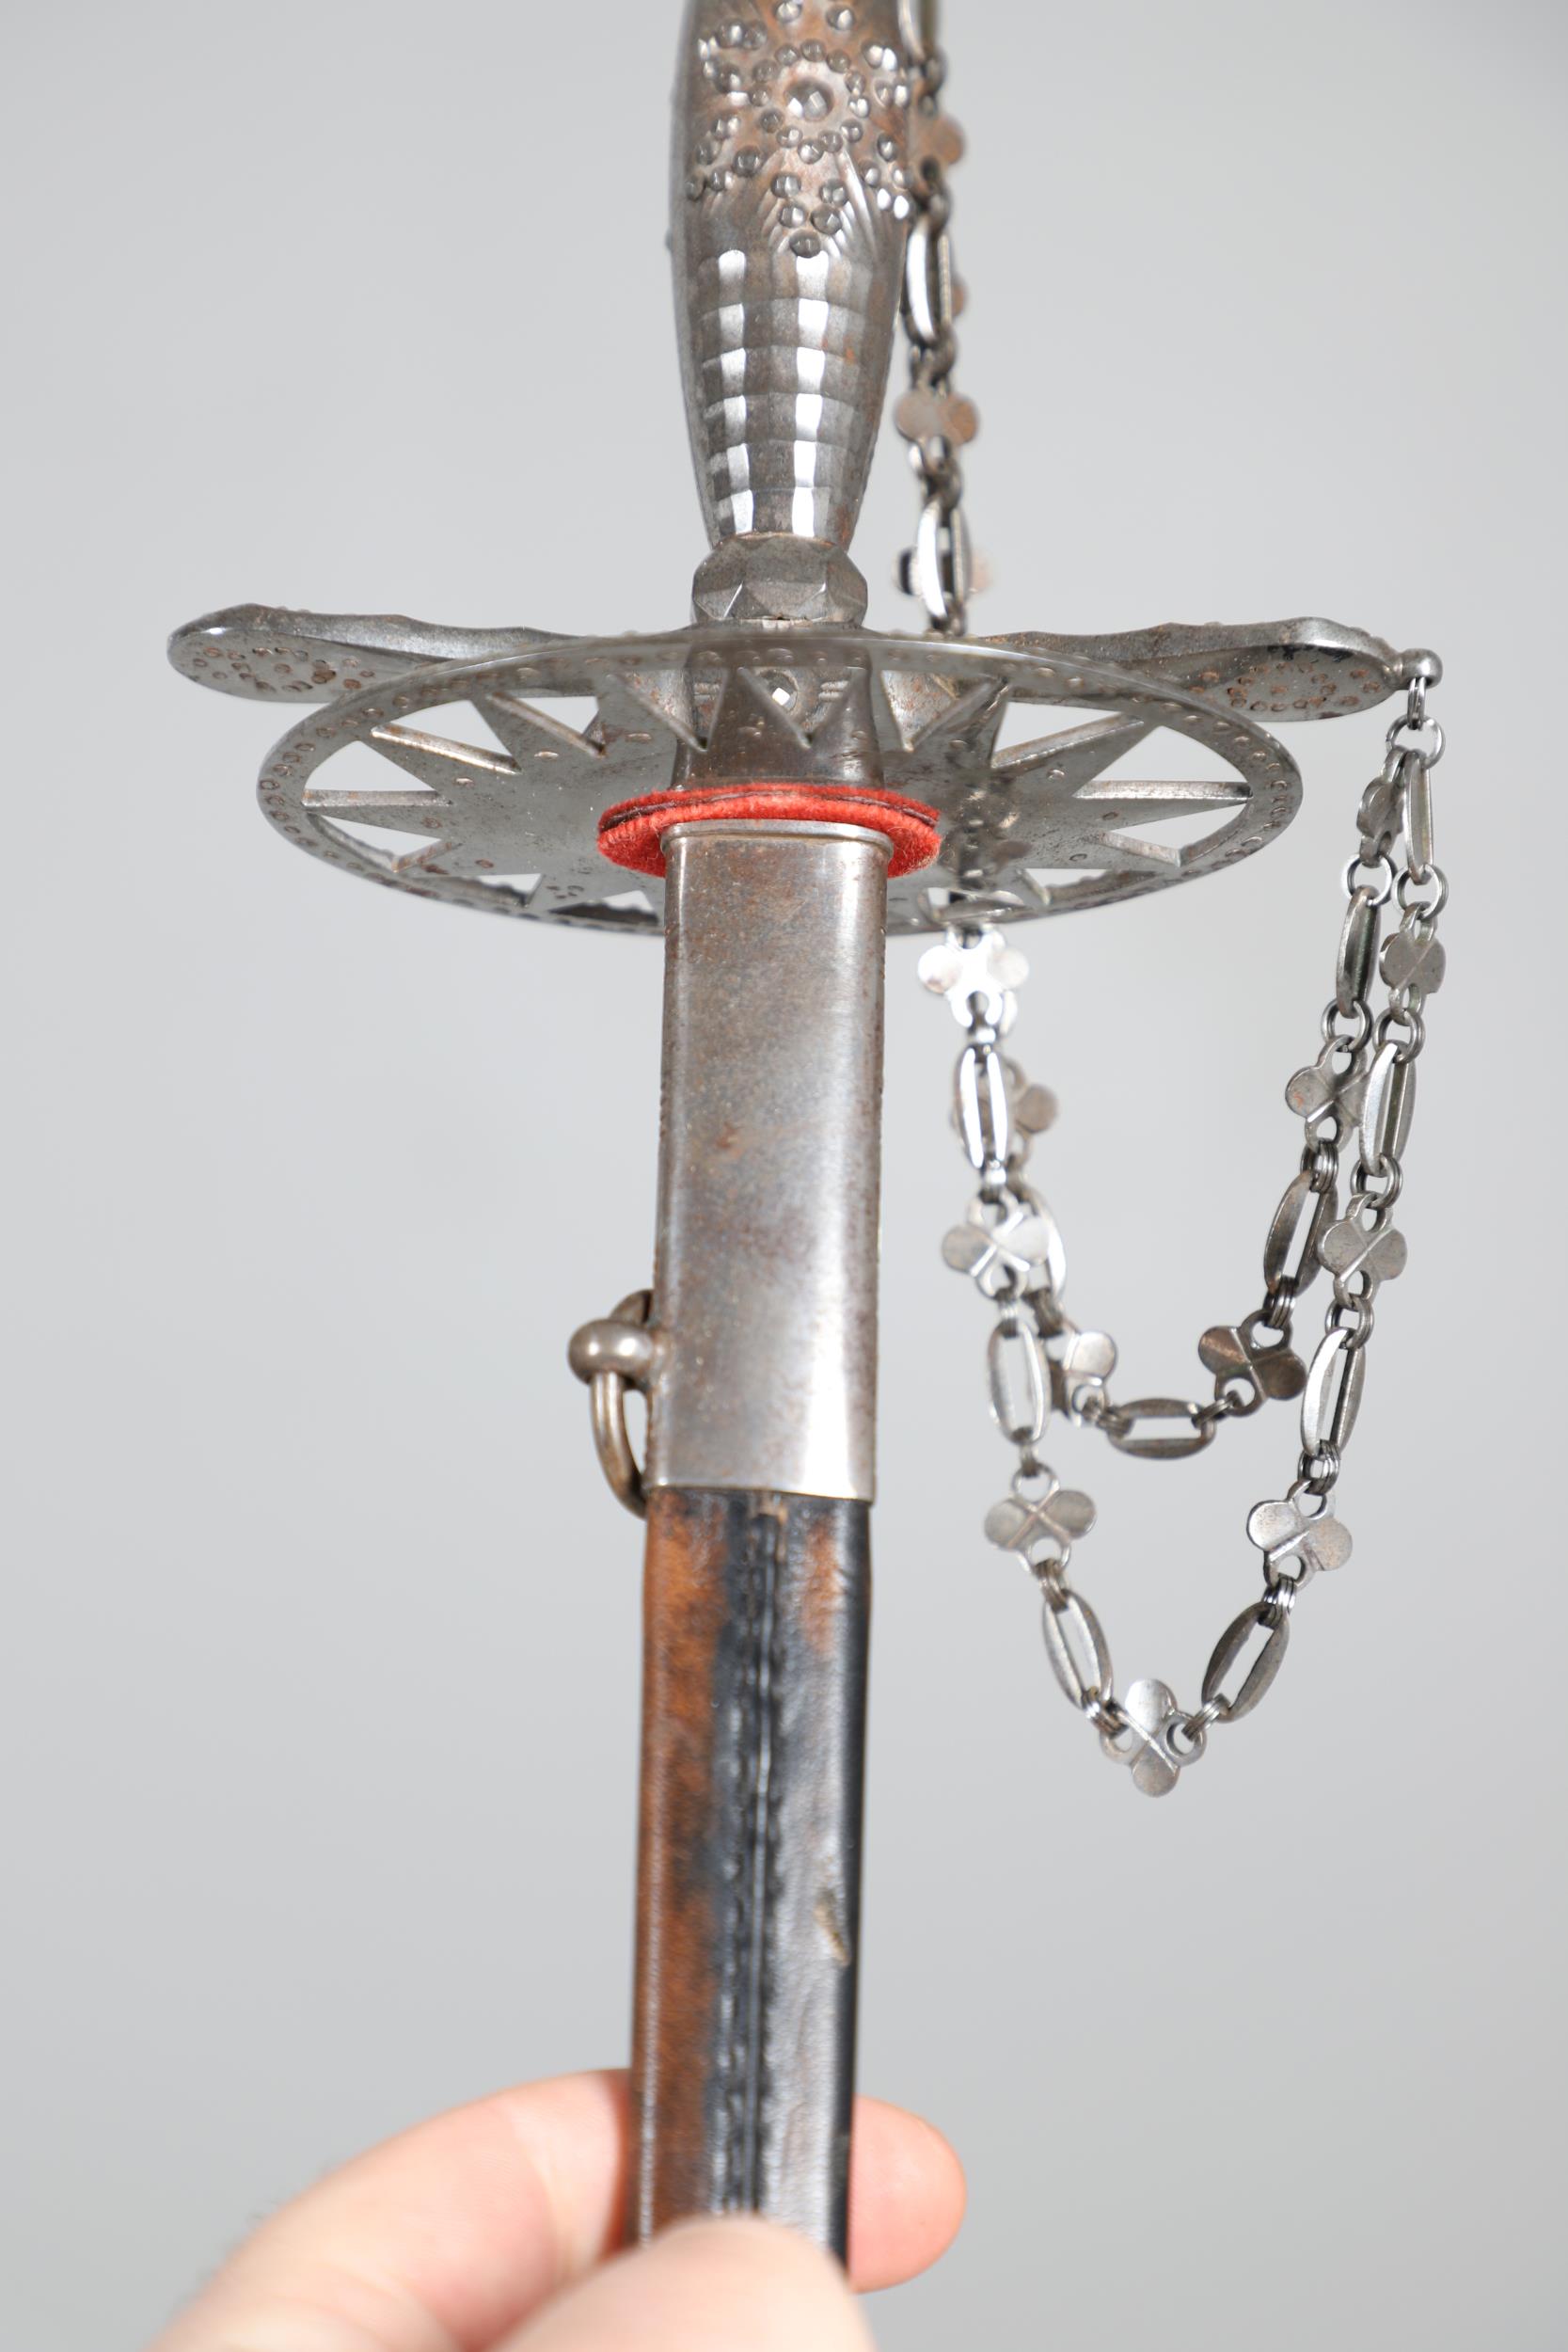 A WILKINSON COURT SWORD HAVING BELONGED TO THE HIGH SHERIFF OF WARWICKSHIRE. - Image 6 of 17